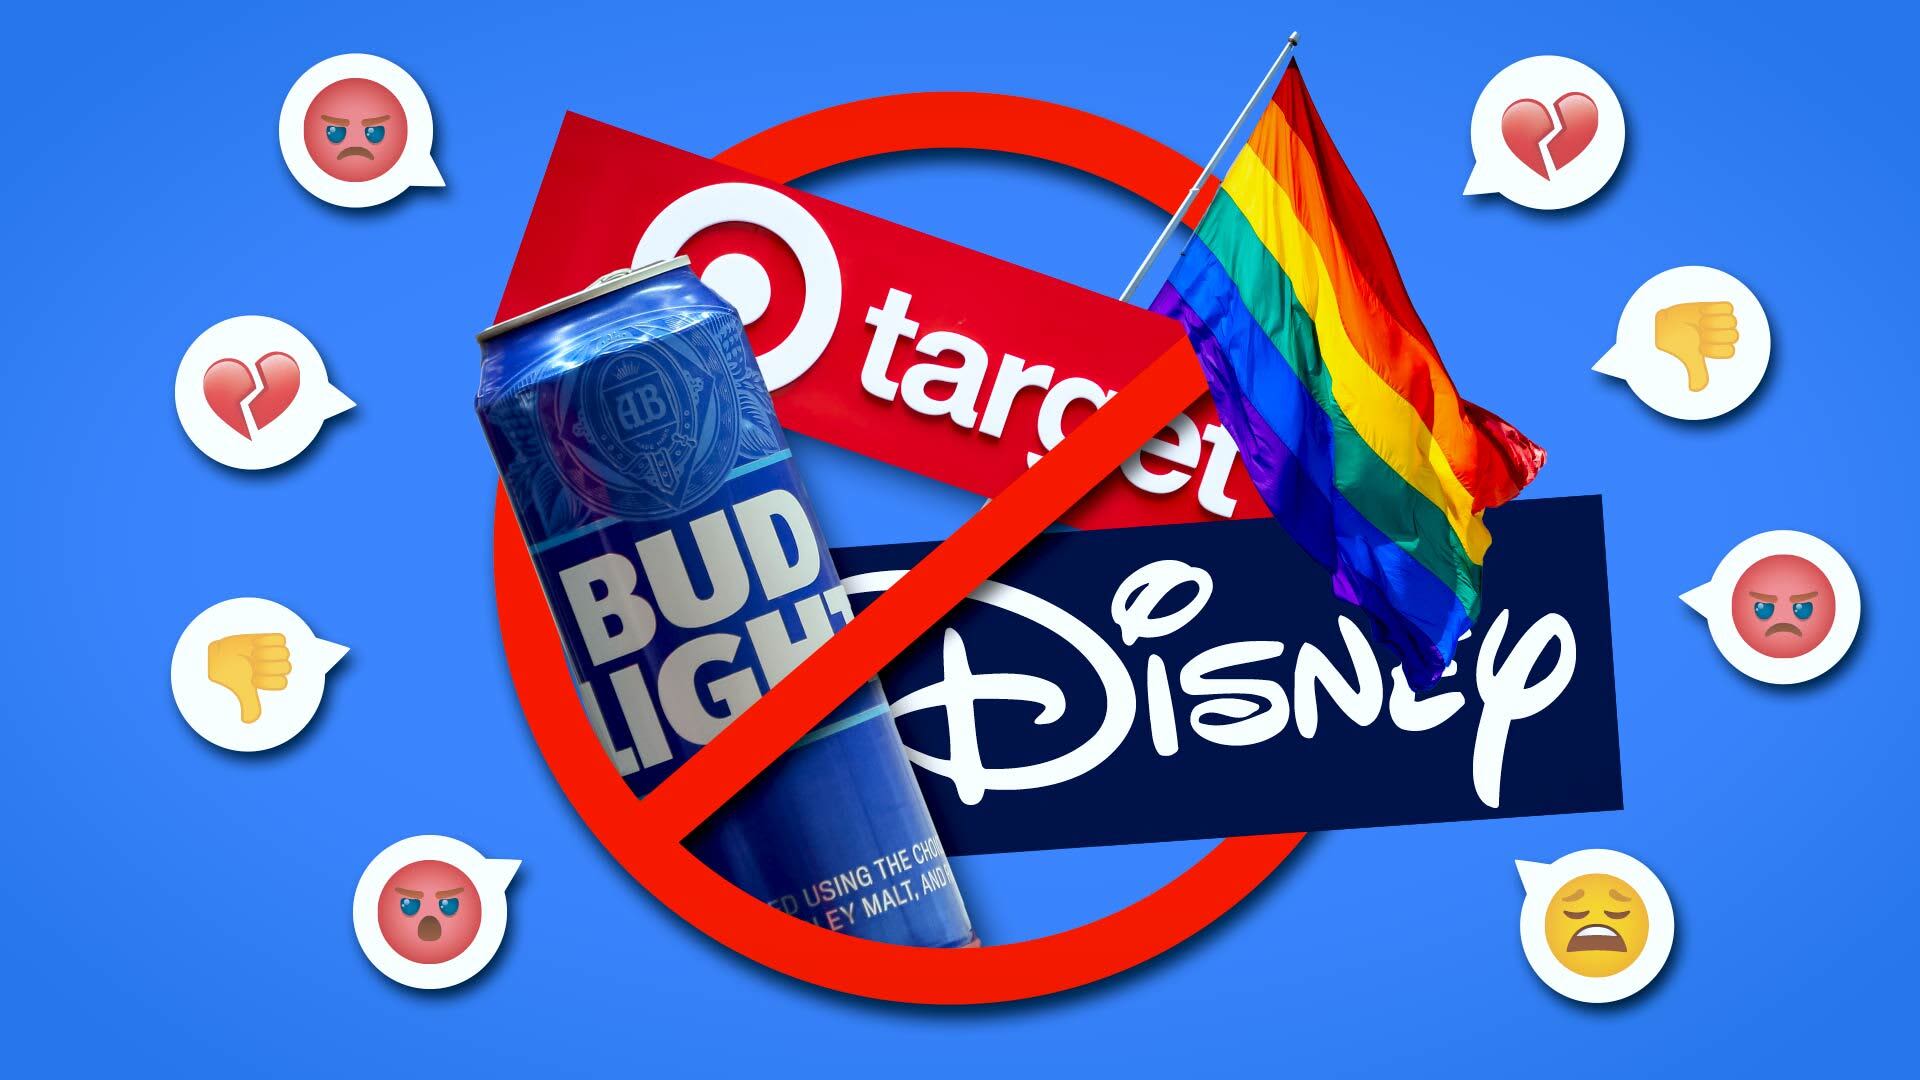 Boycotts rarely work — but anti-LGBTQ+ backlash is forcing companies into tough choices